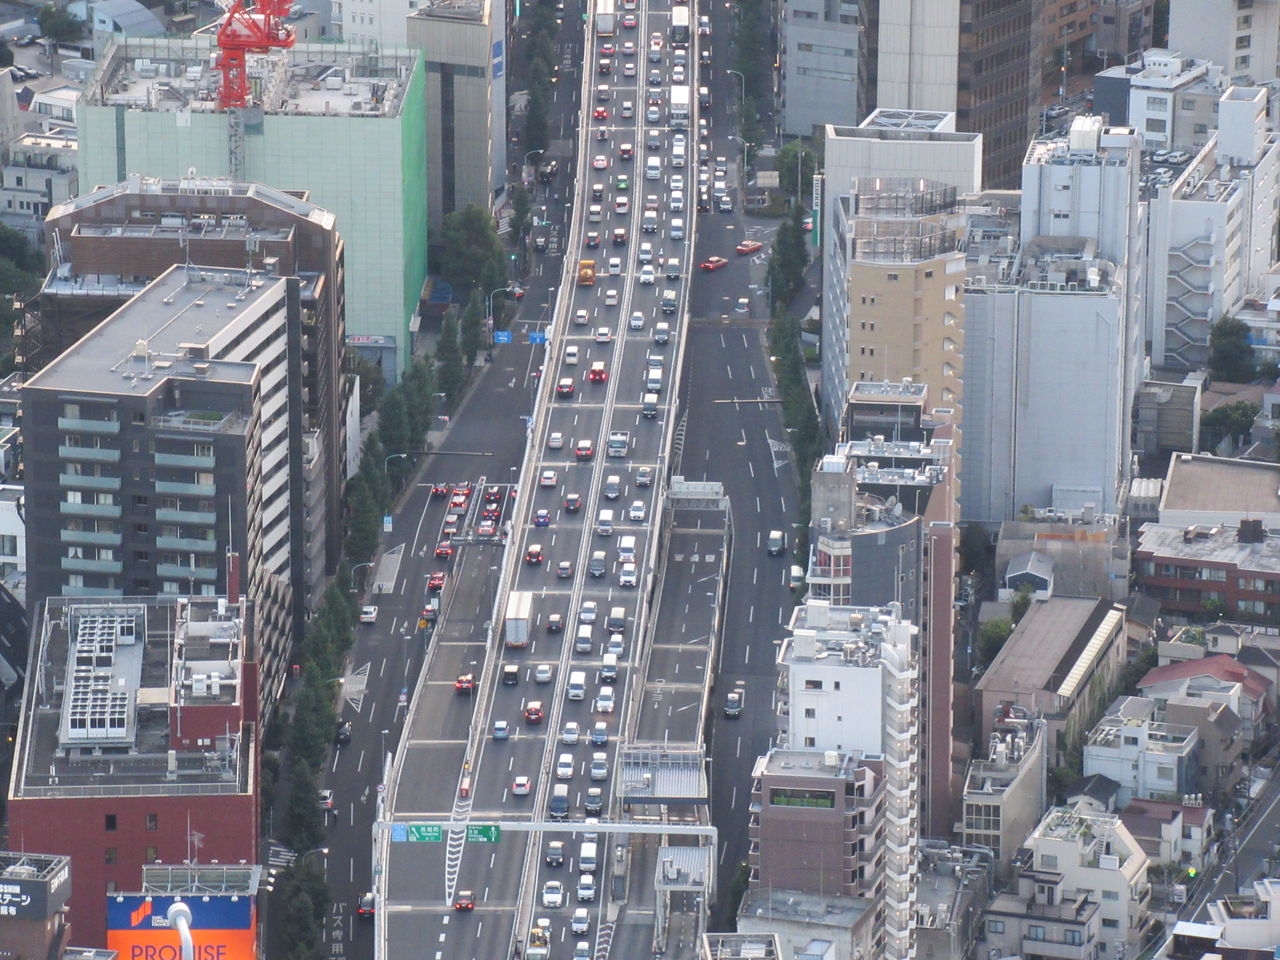 HIGH ANGLE VIEW OF TRAFFIC ON CITY STREET